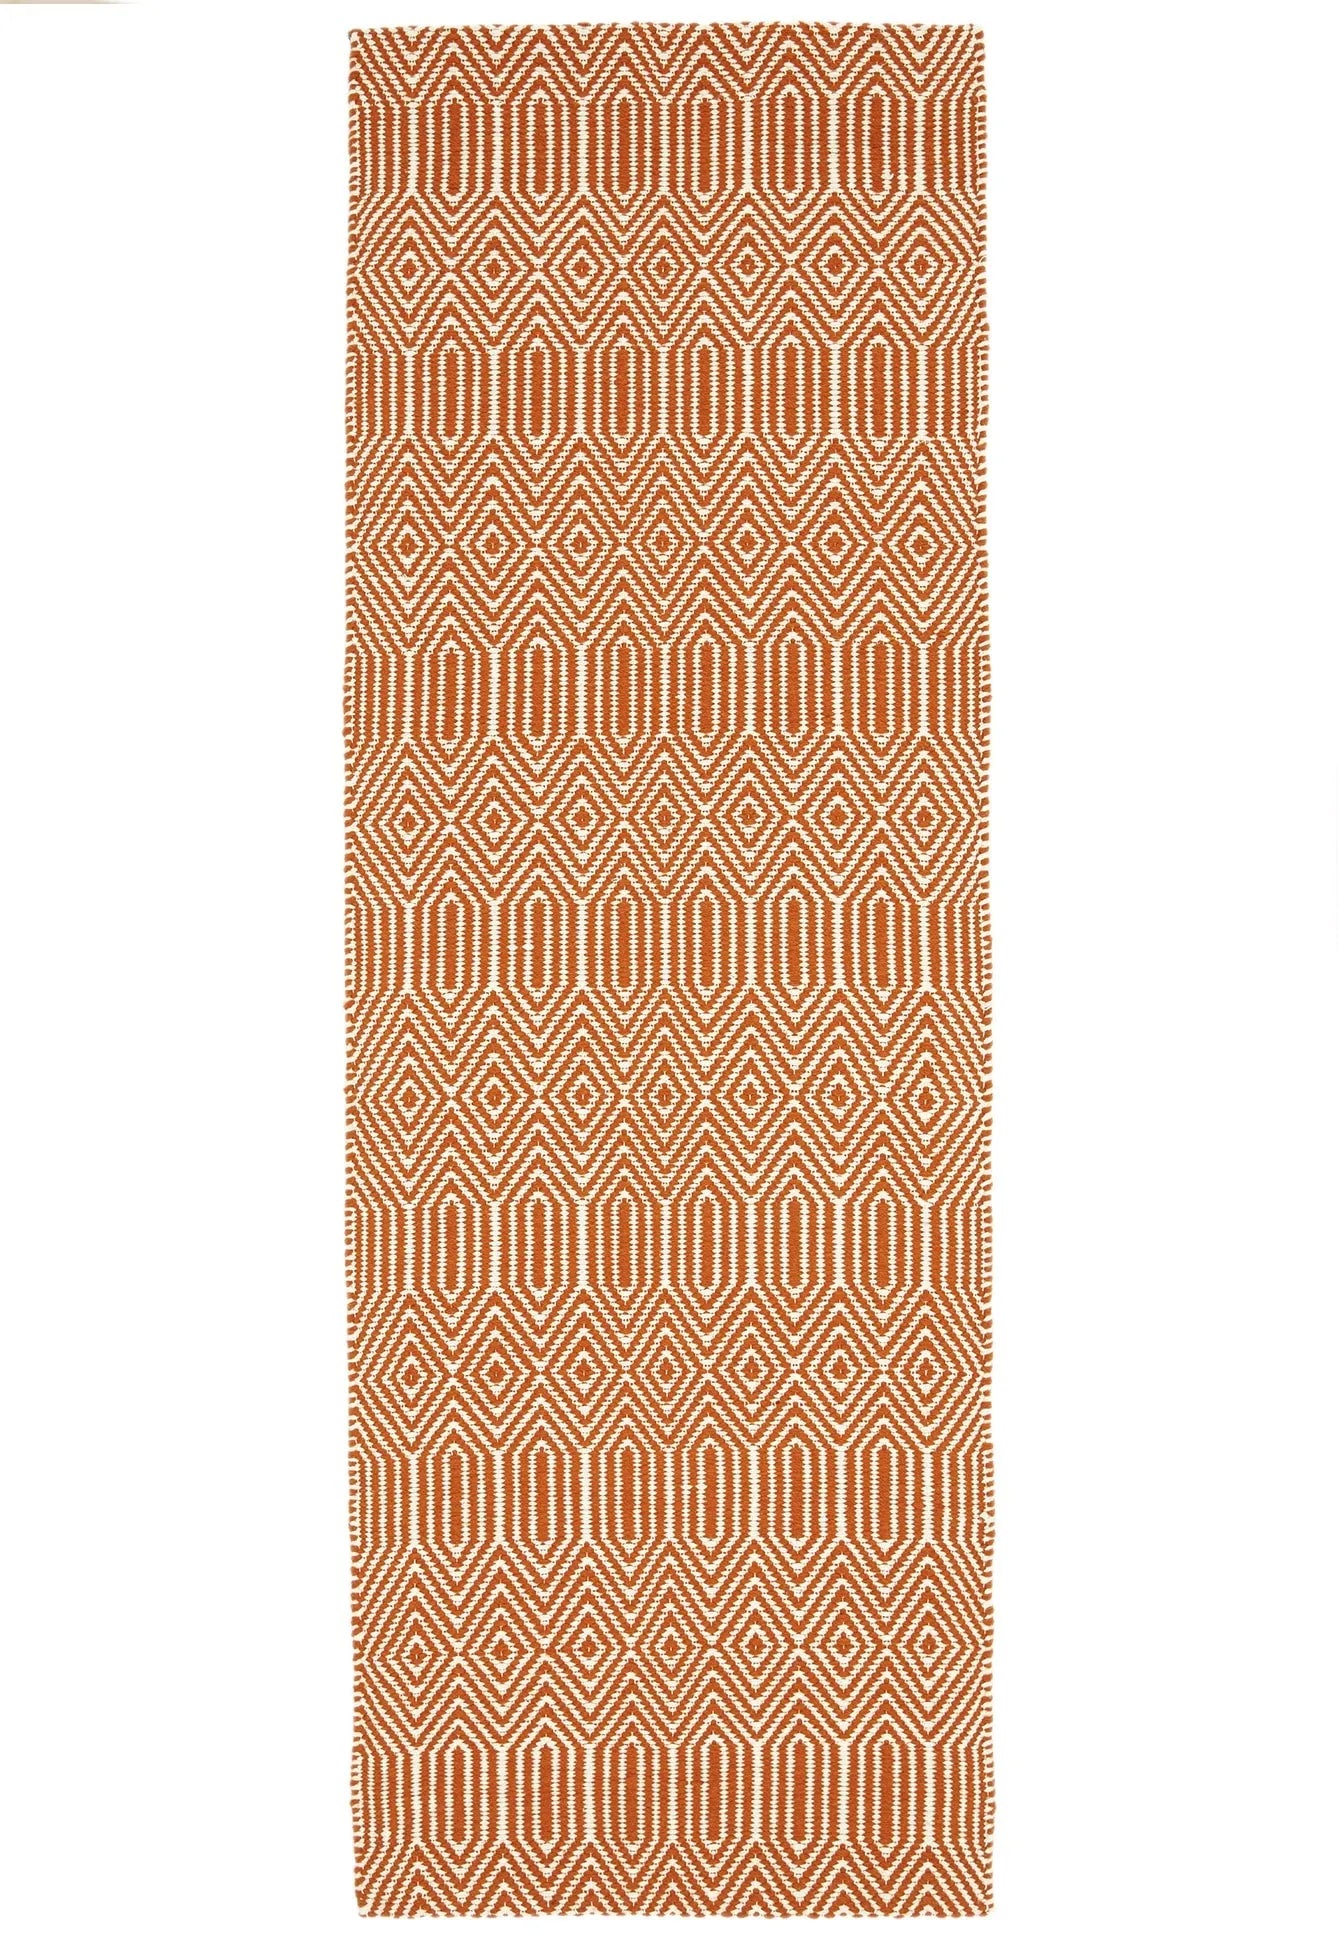 orange and white geometric runner with an aztec pattern